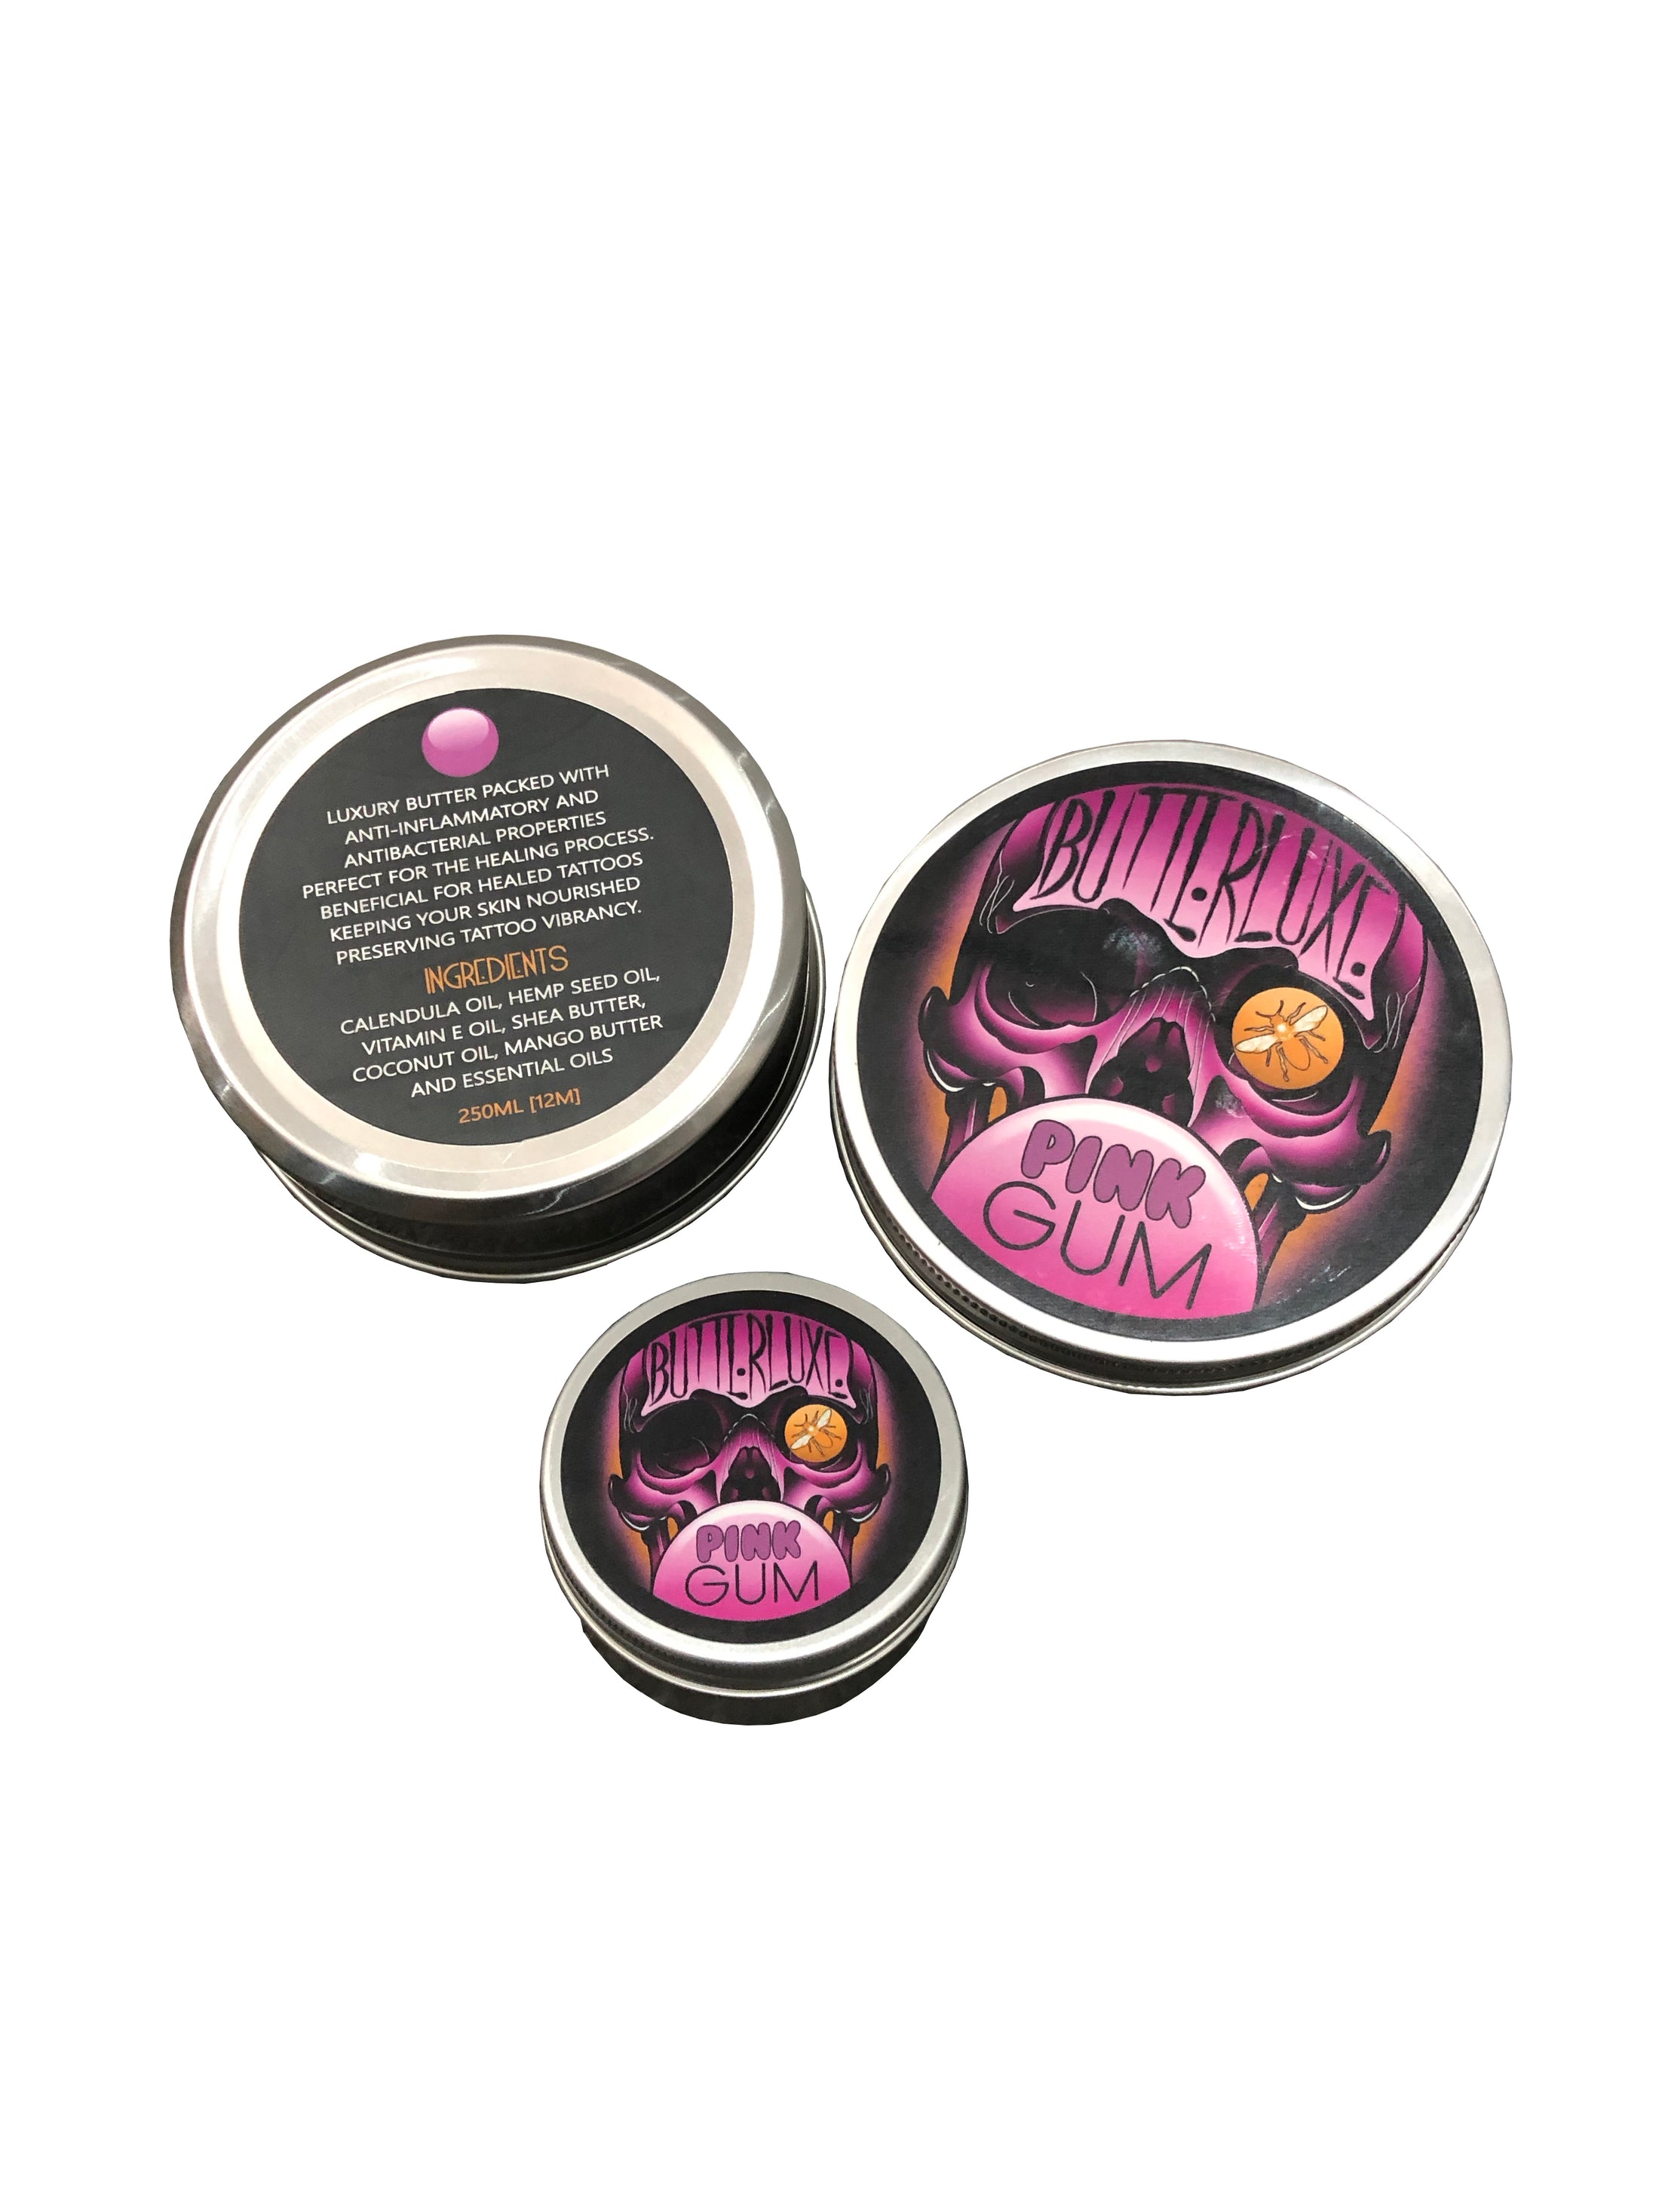 ButterLuxe Luxury Balm Tattoo Aftercare